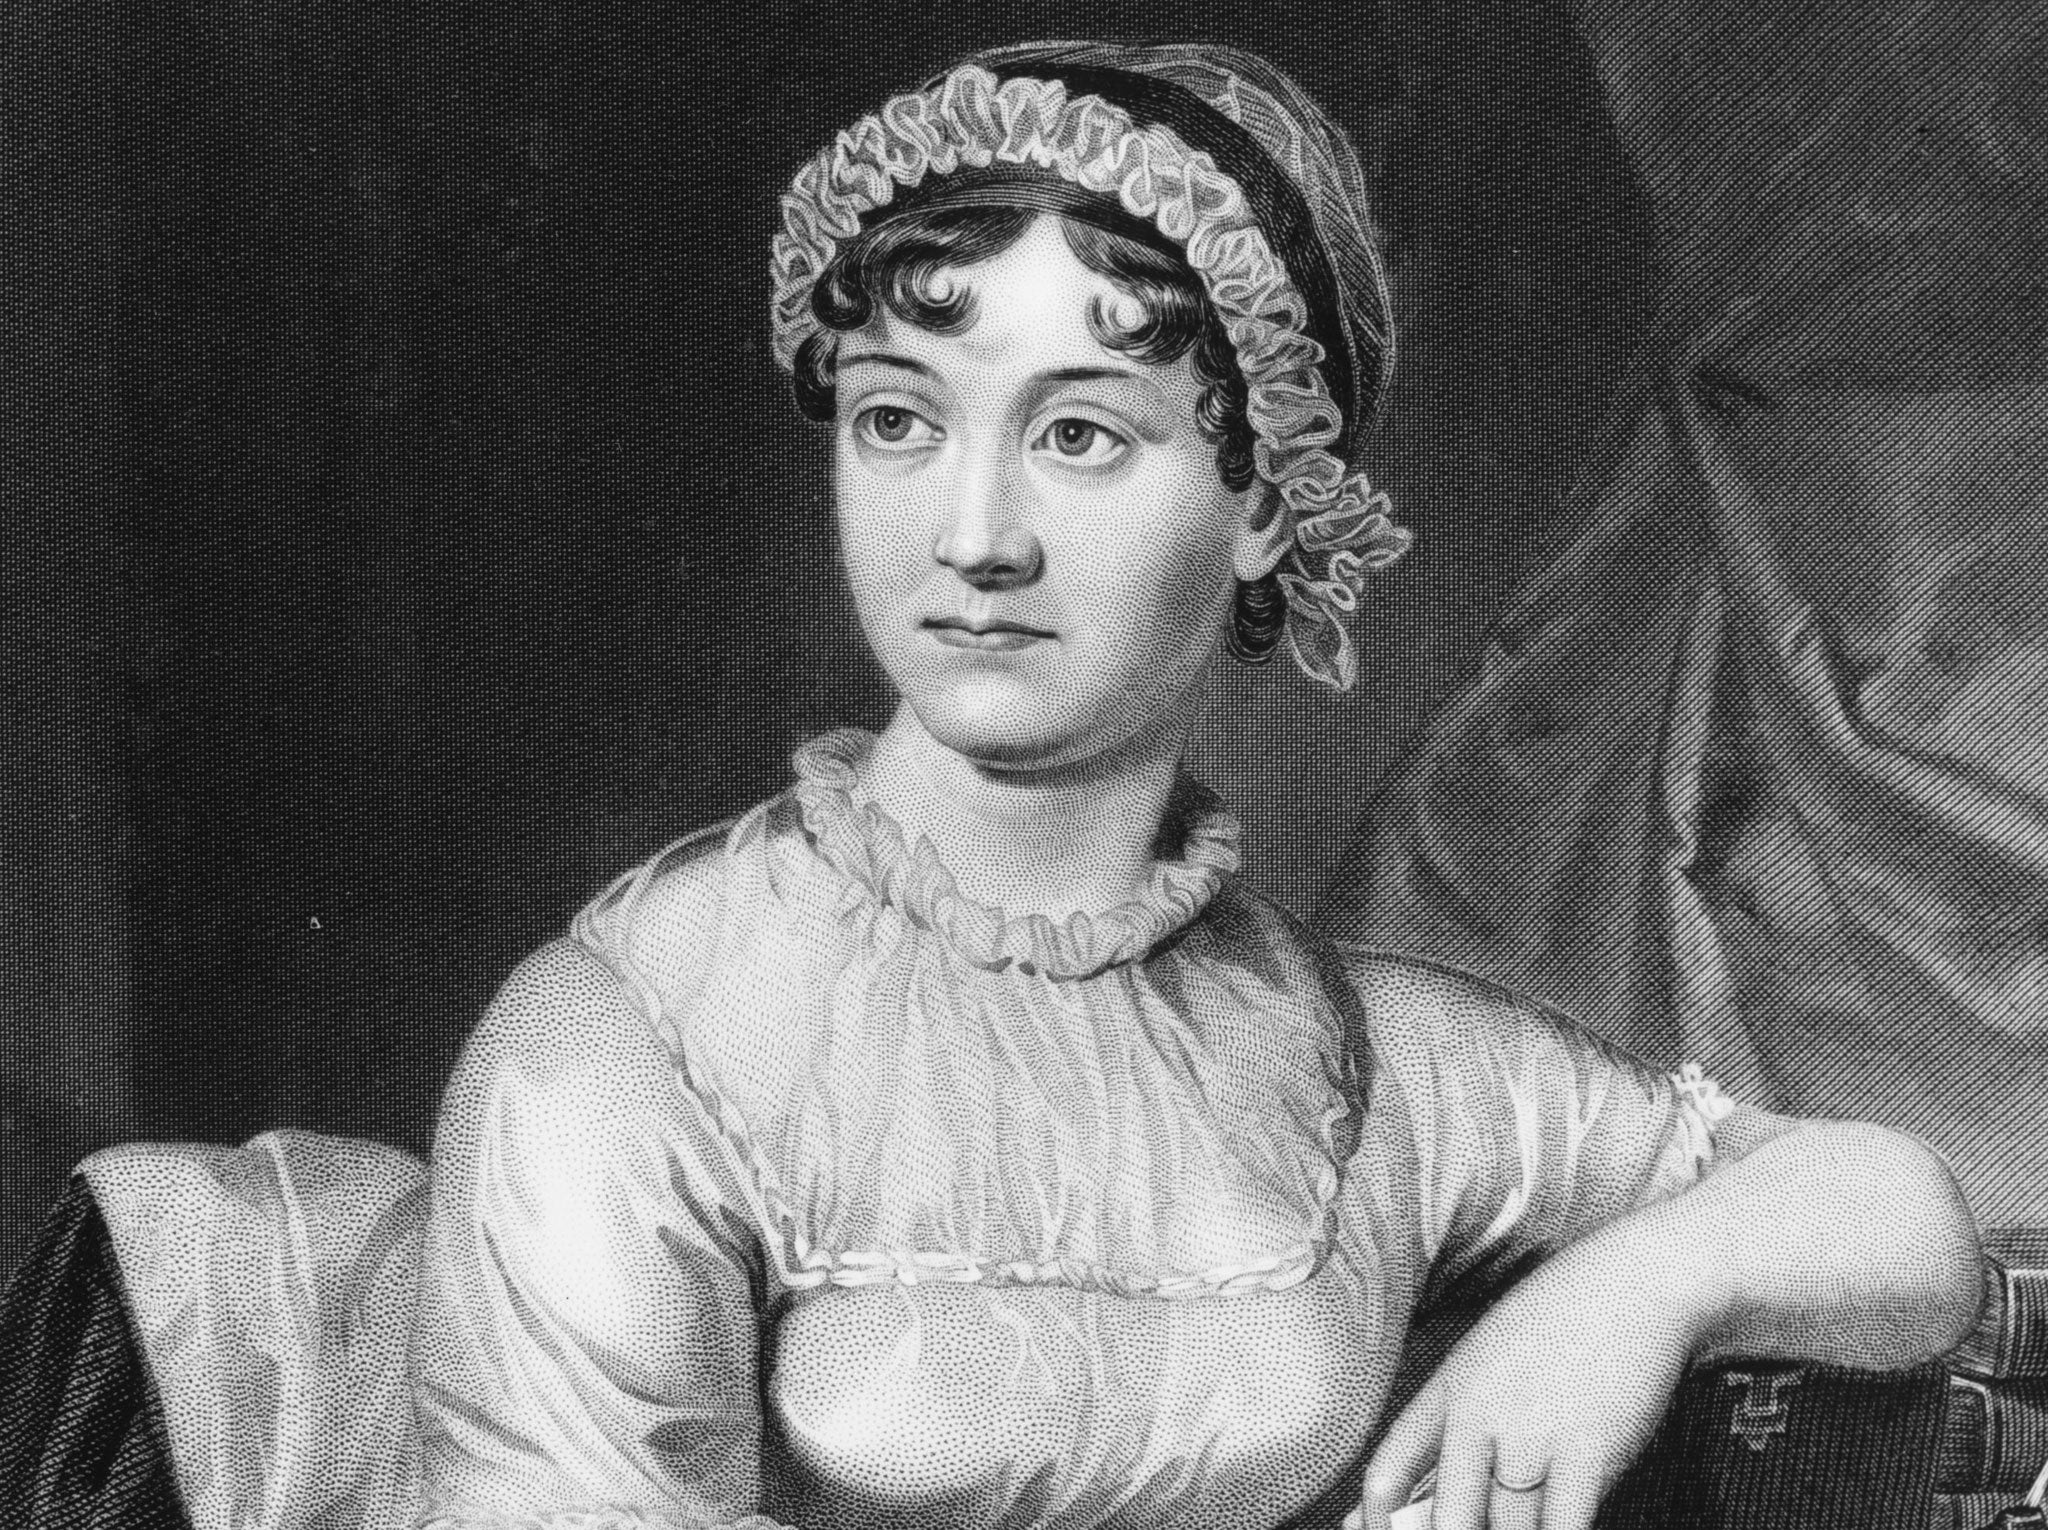 Many of Jane Austen's observations about society are still relevant today